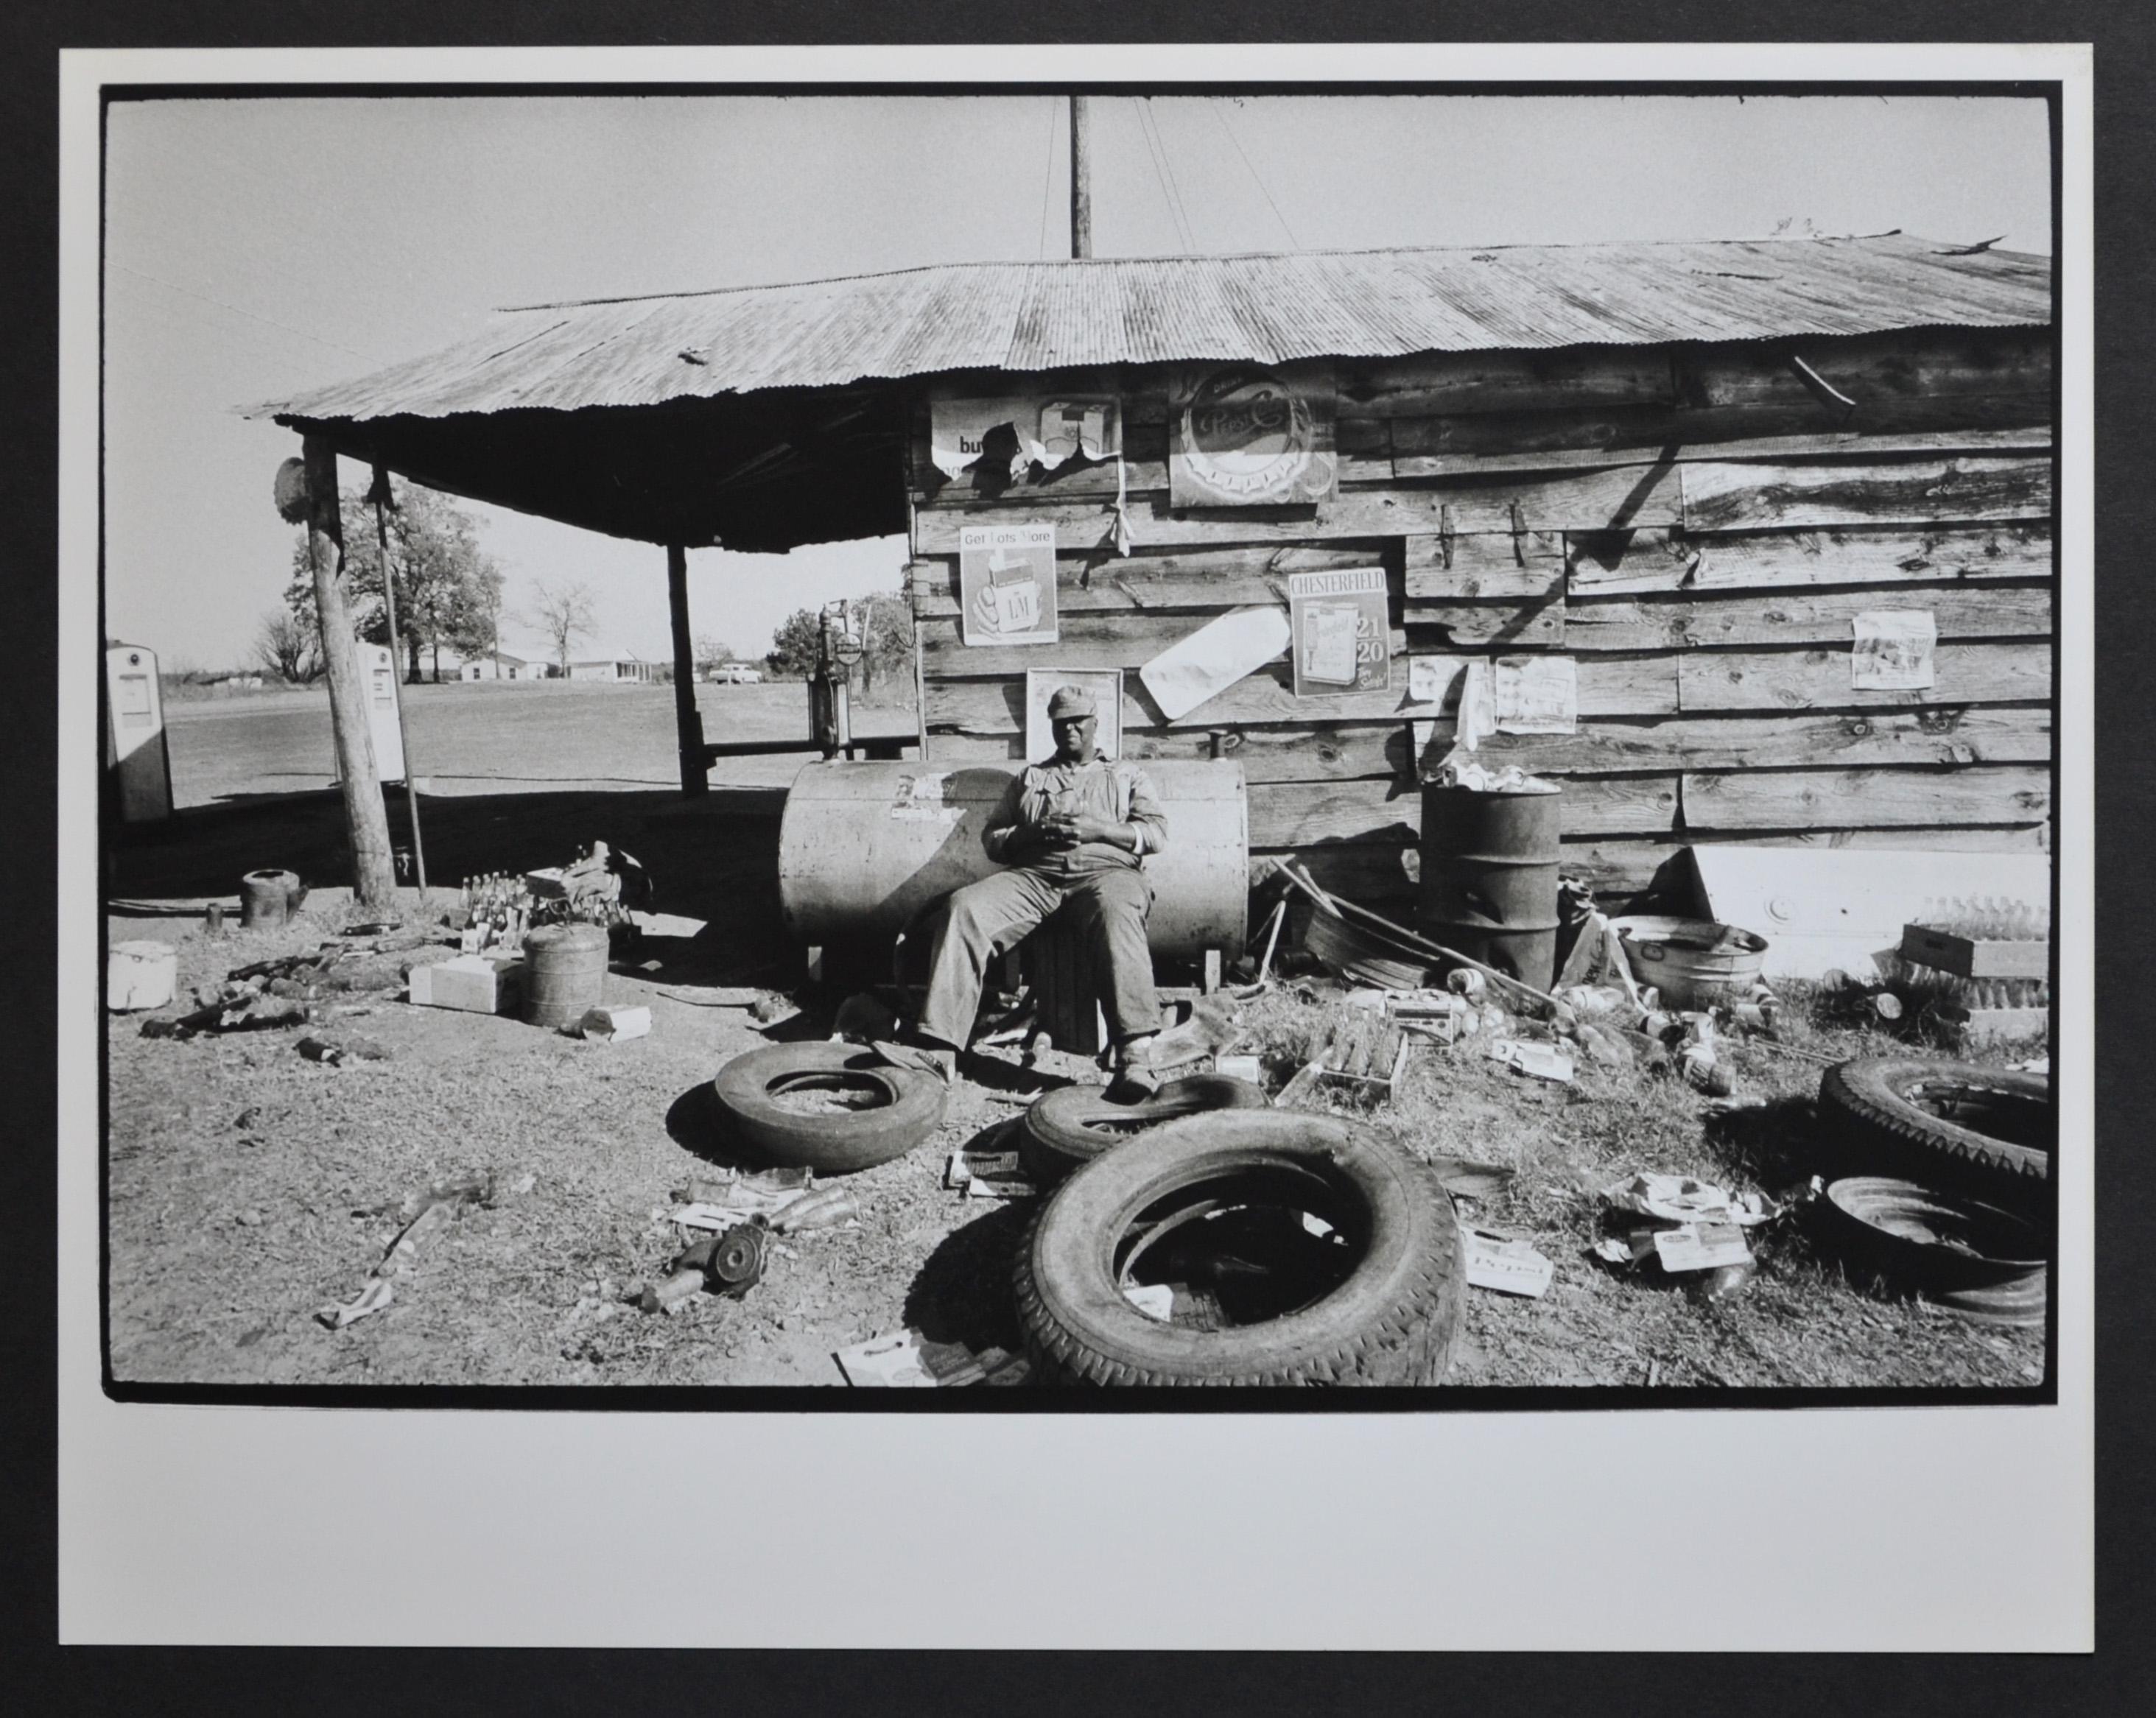 Rolf Gillhausen Black and White Photograph - Mississippi area man sitting in front of his hut, USA early 1960s.